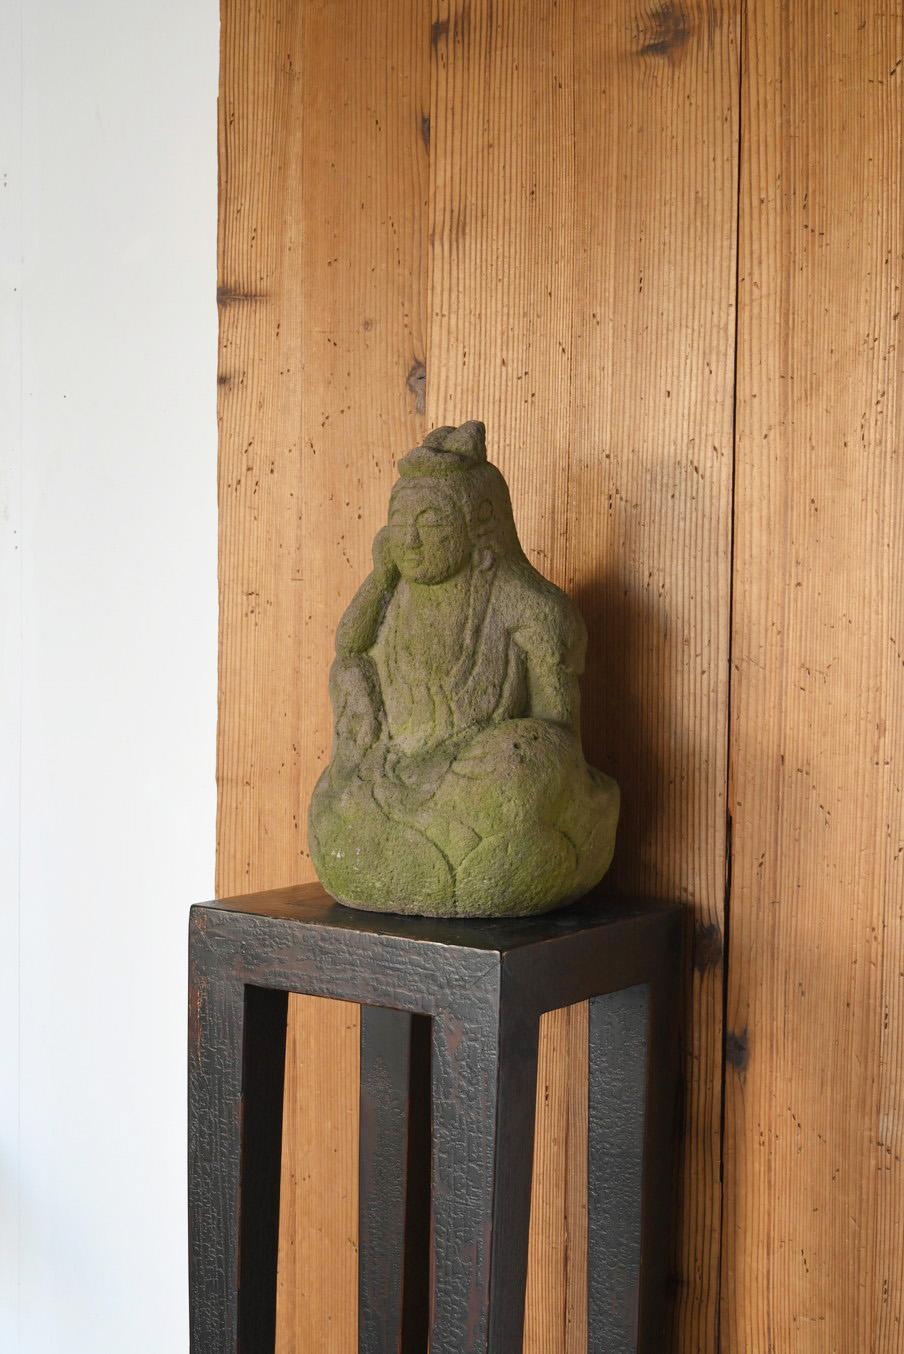 This is a stone Buddha from the Edo period (1750-1850) made of andesite.
This is a Buddhist statue called Nyo-i-rin Kannon.
Nyoirin Kannon is basically a half-prostrate figure with his right hand on his cheek. It is said that he is worried about how